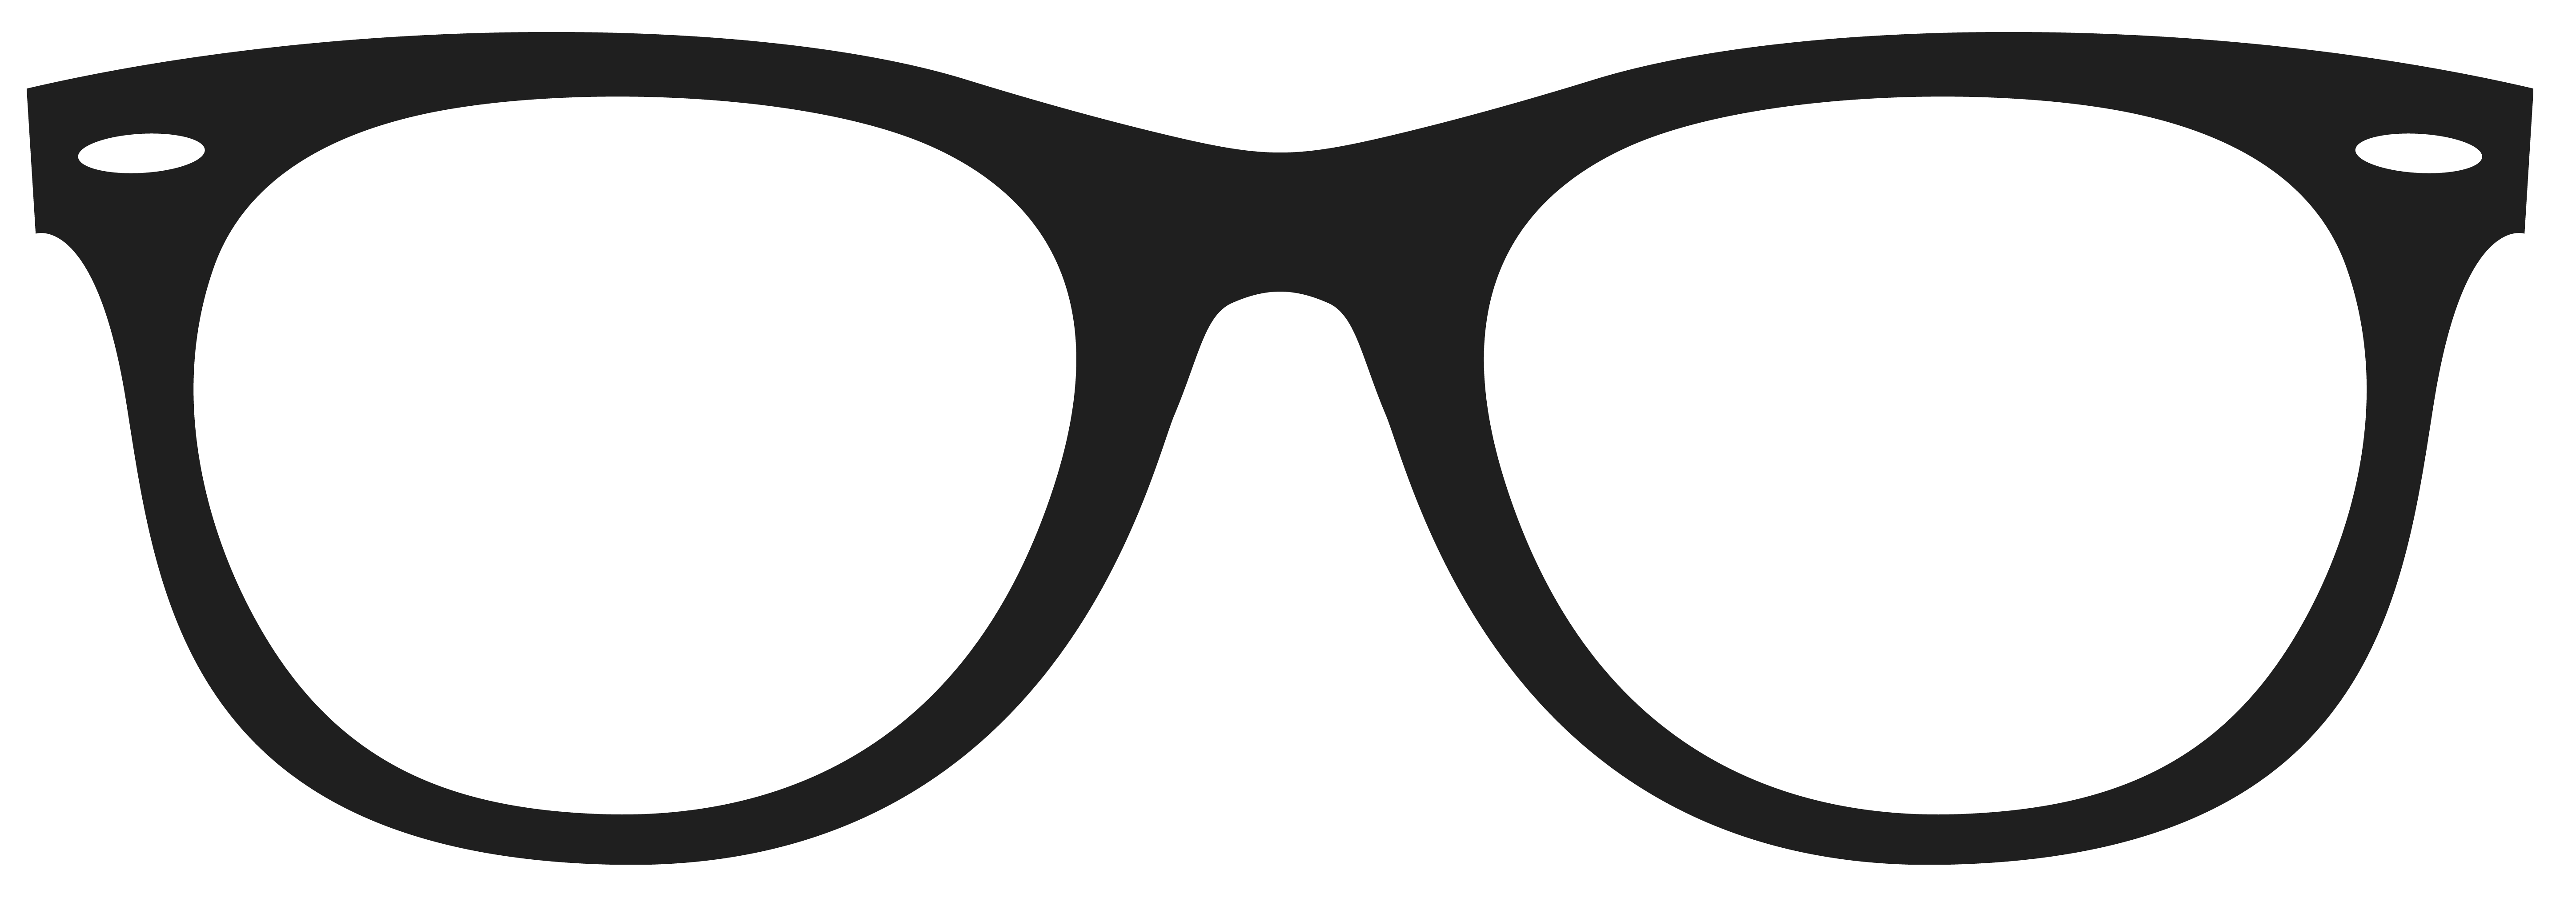 Ray bans for kids. Goggles clipart optical frame